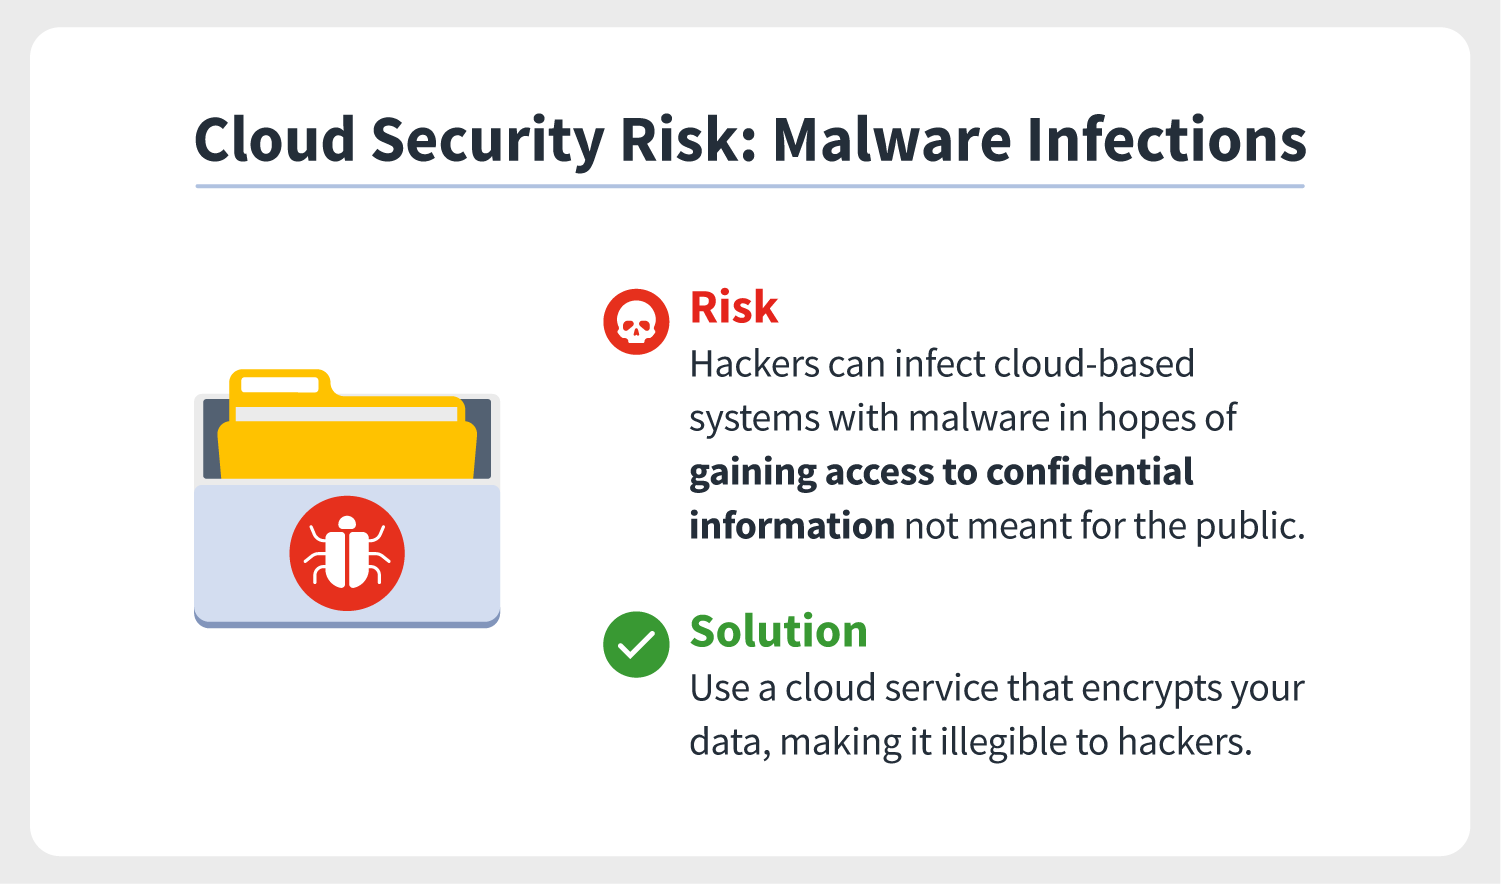 An illustration accompanies an explanation of how malware infections are among the most dangerous cloud security risks on the internet. 